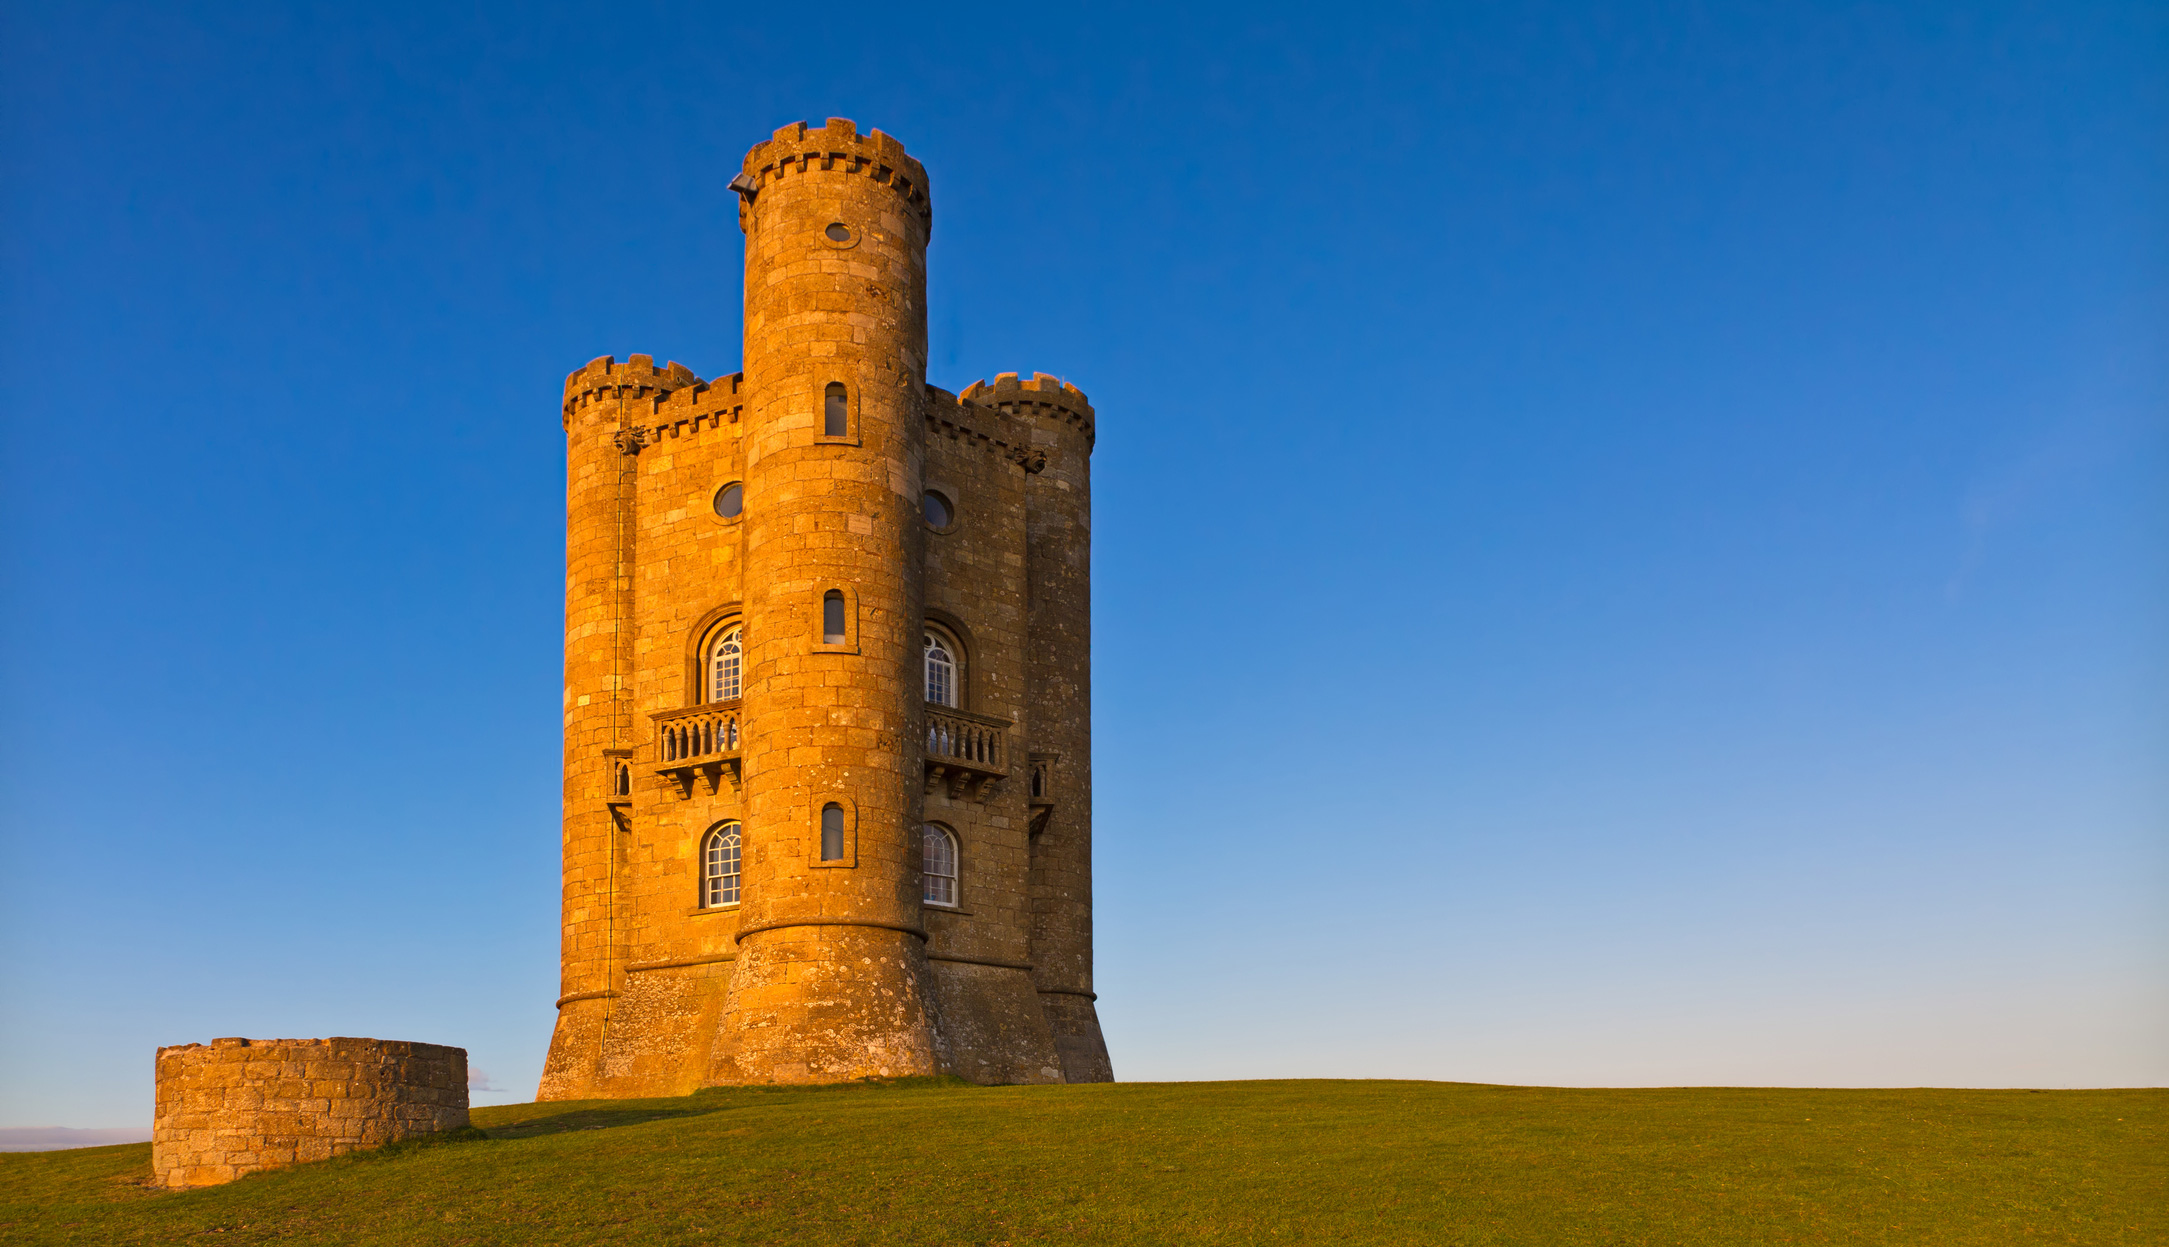 Broadway Tower on the Cotswold Way